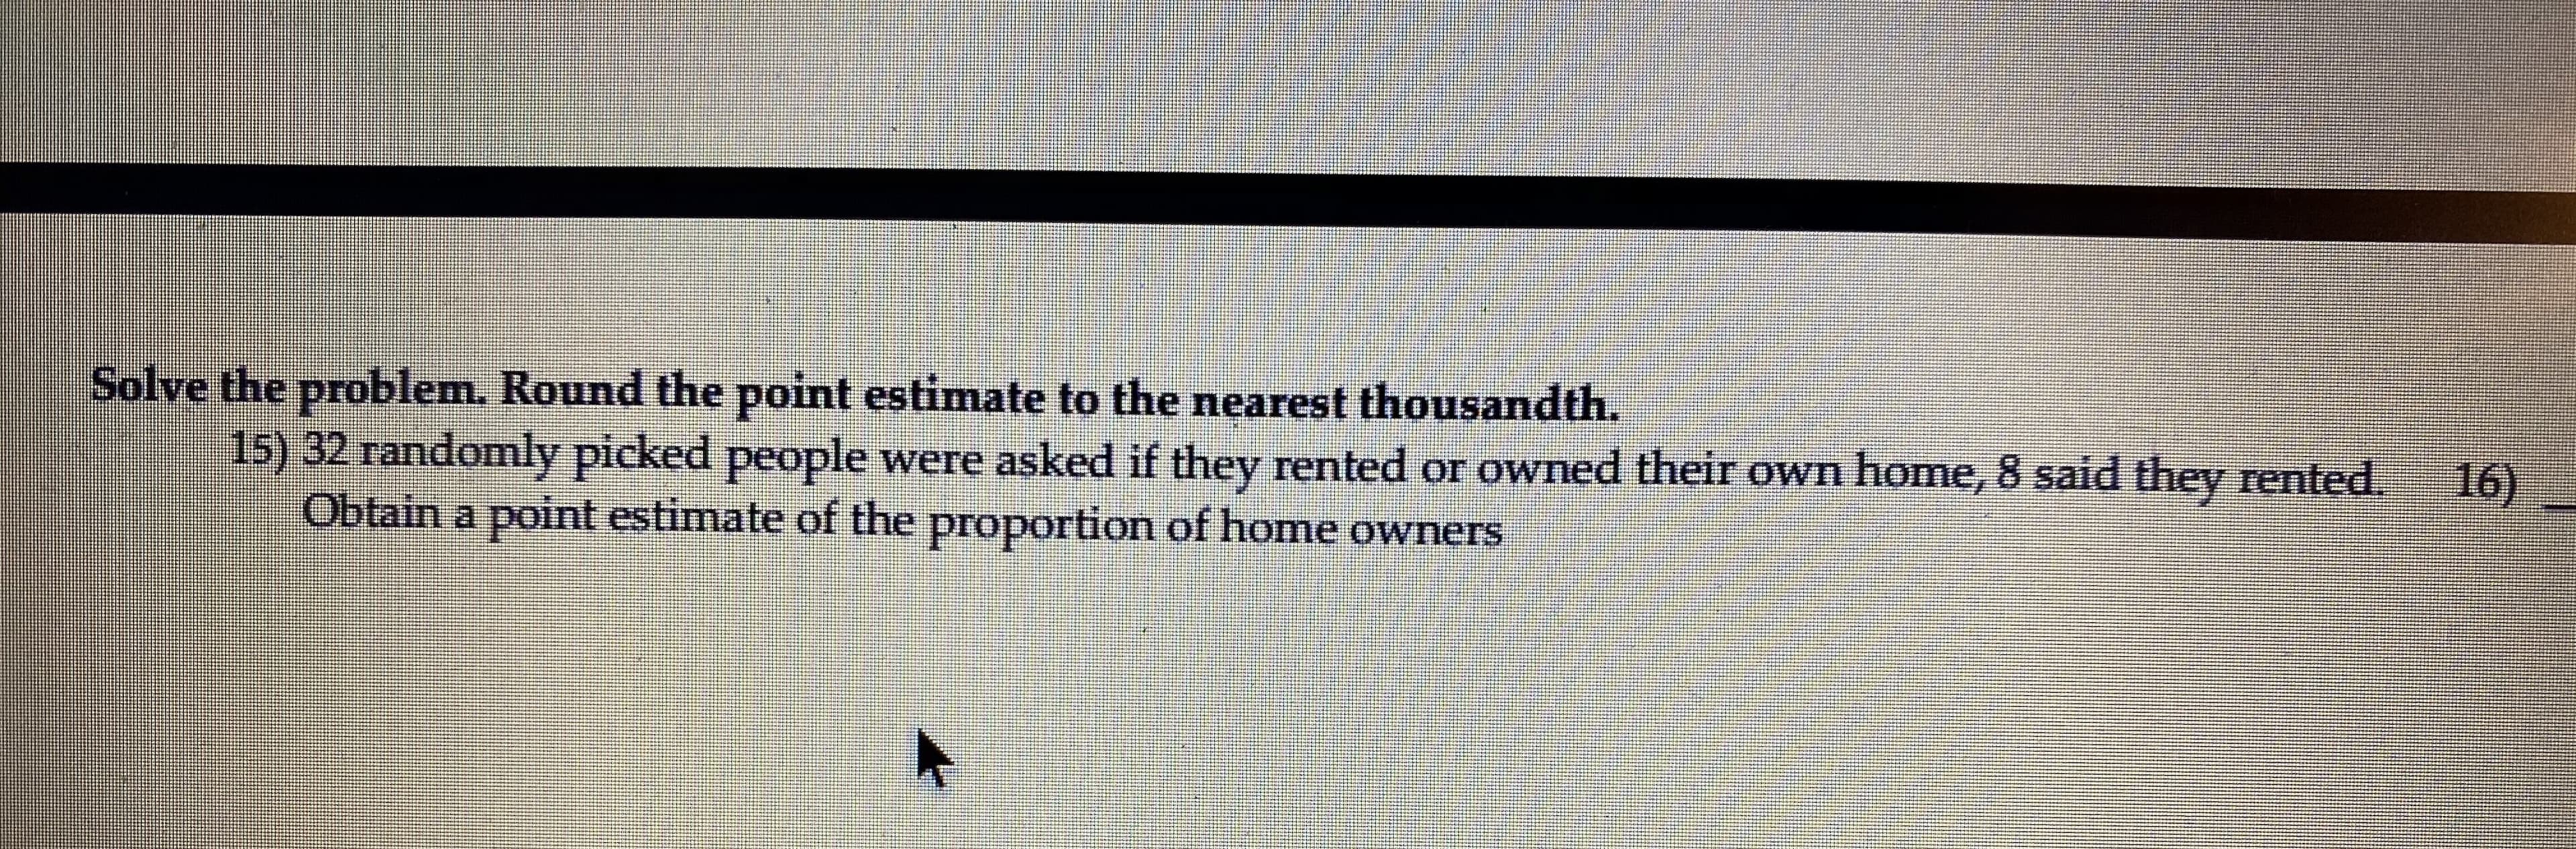 ) 32 randomly picked people were asked if they rented or owned their own home, 8 said they rented.
Obtain a point estimate of the proportion of home owners
